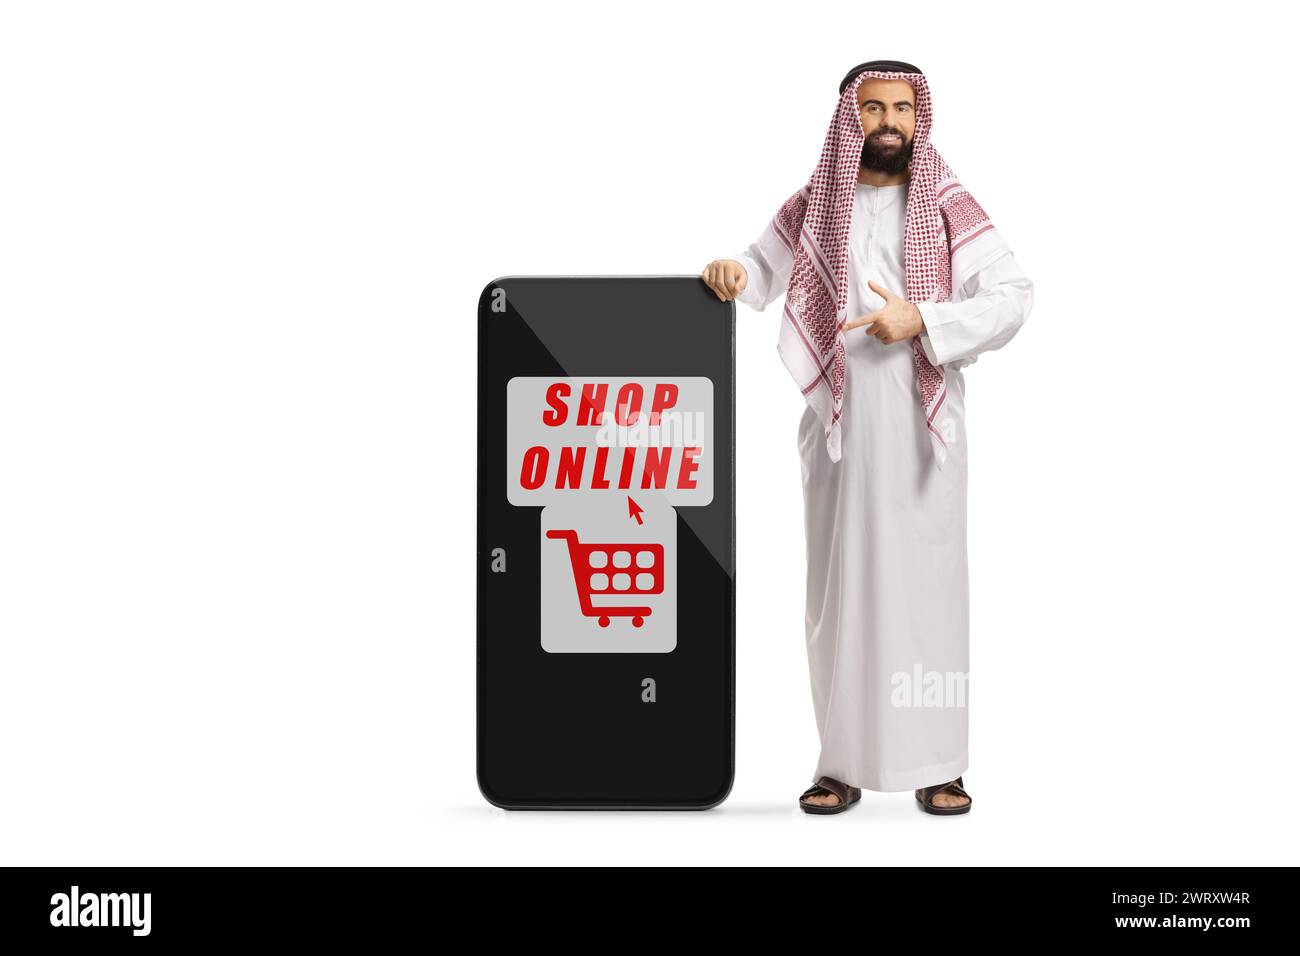 Saudi arab man in ethnic clothes standing next to a mobile phone with online shopping sign isolated on white background Stock Photo